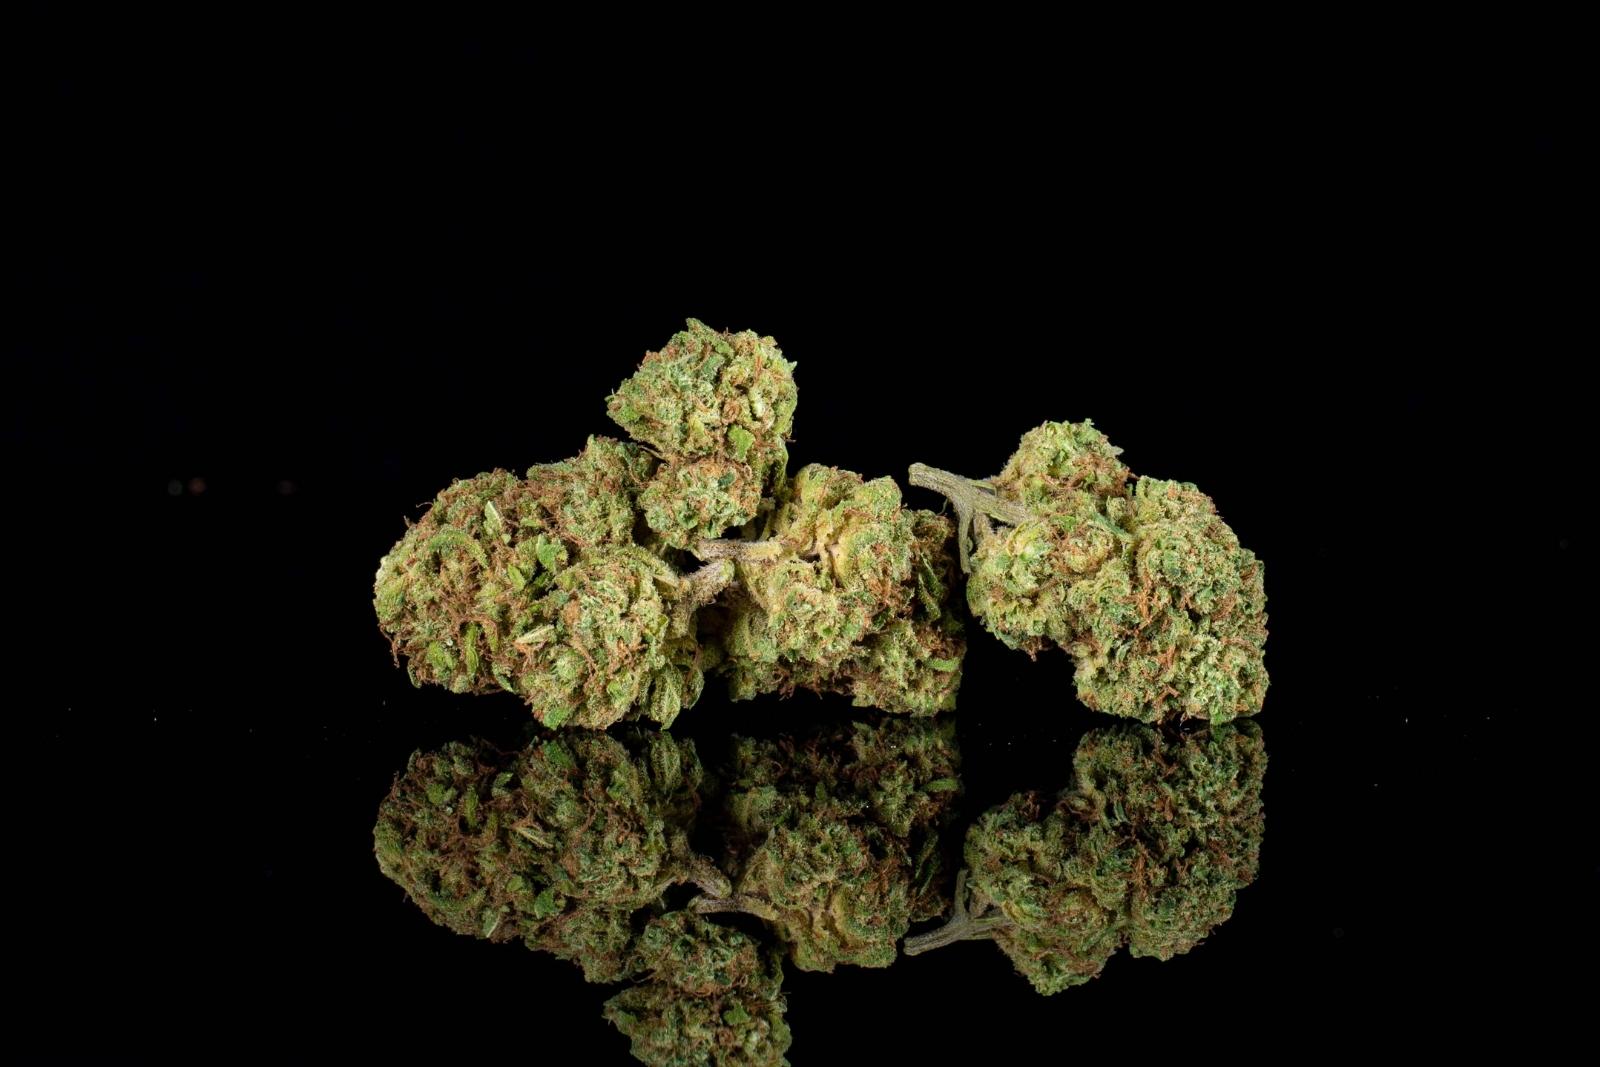 A group of nugs of Blueberry hemp flower by Holy City Farms, on a black background